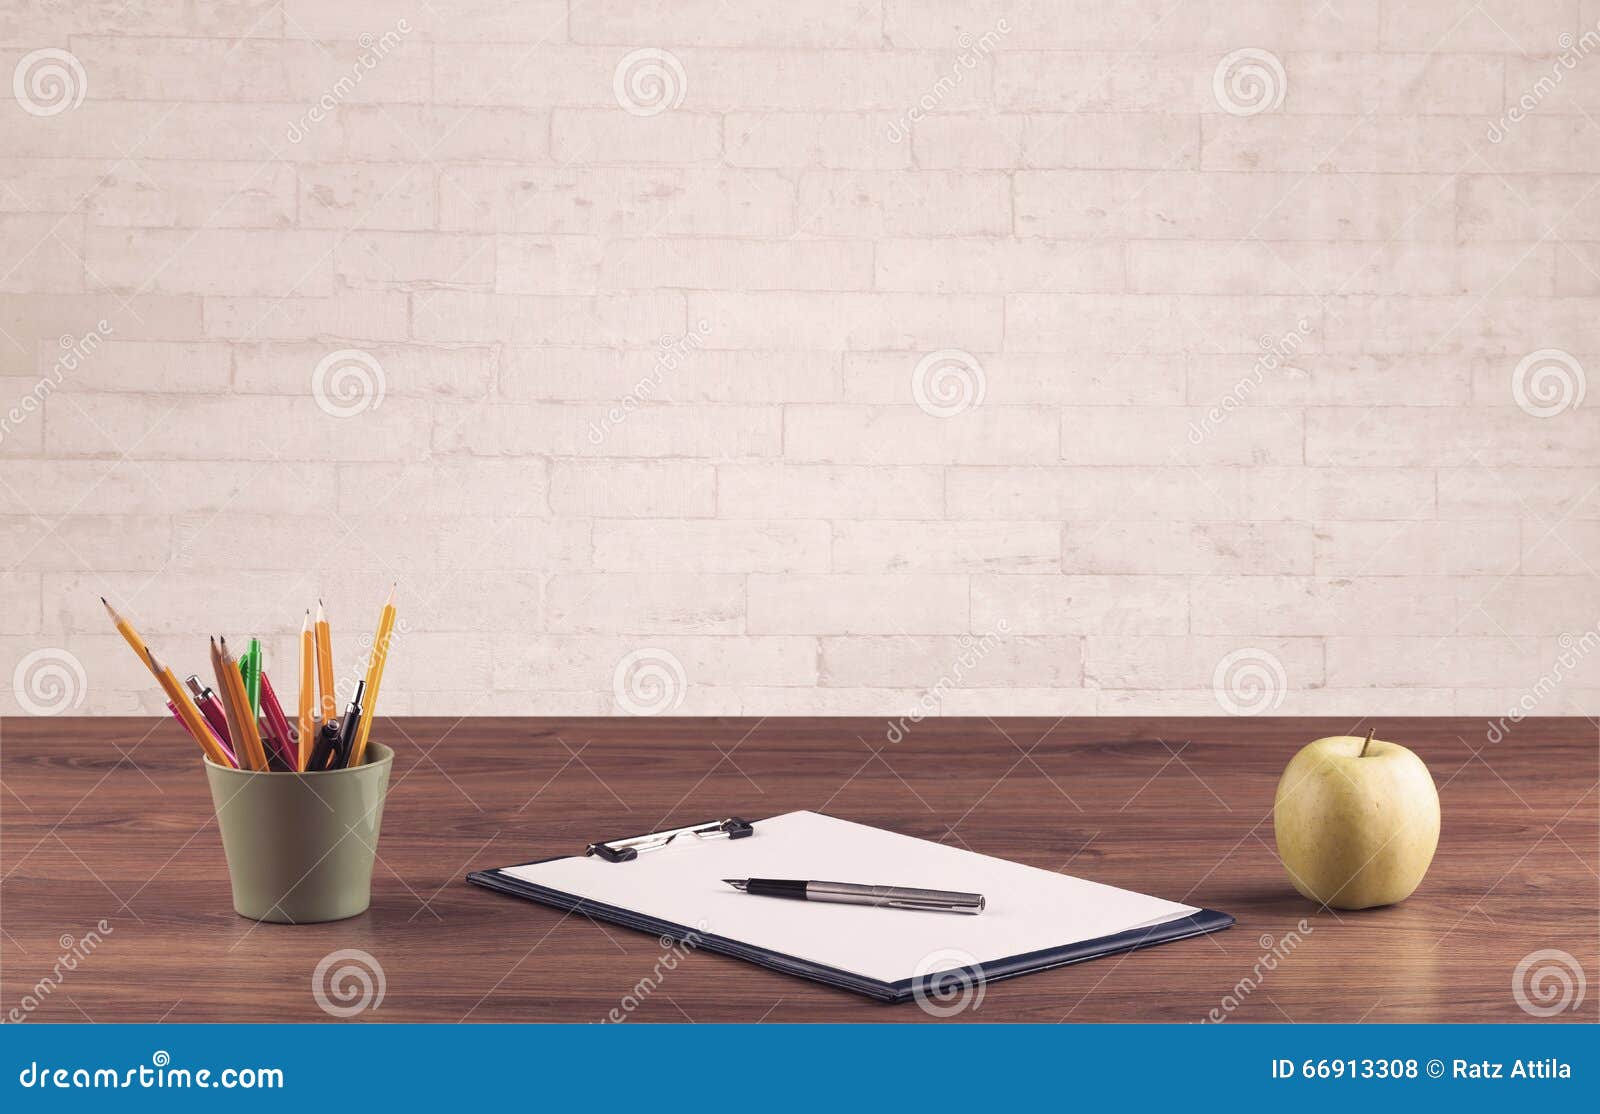 office desk closeup white brick wall close up business pen board coffee front empty textured background 66913308